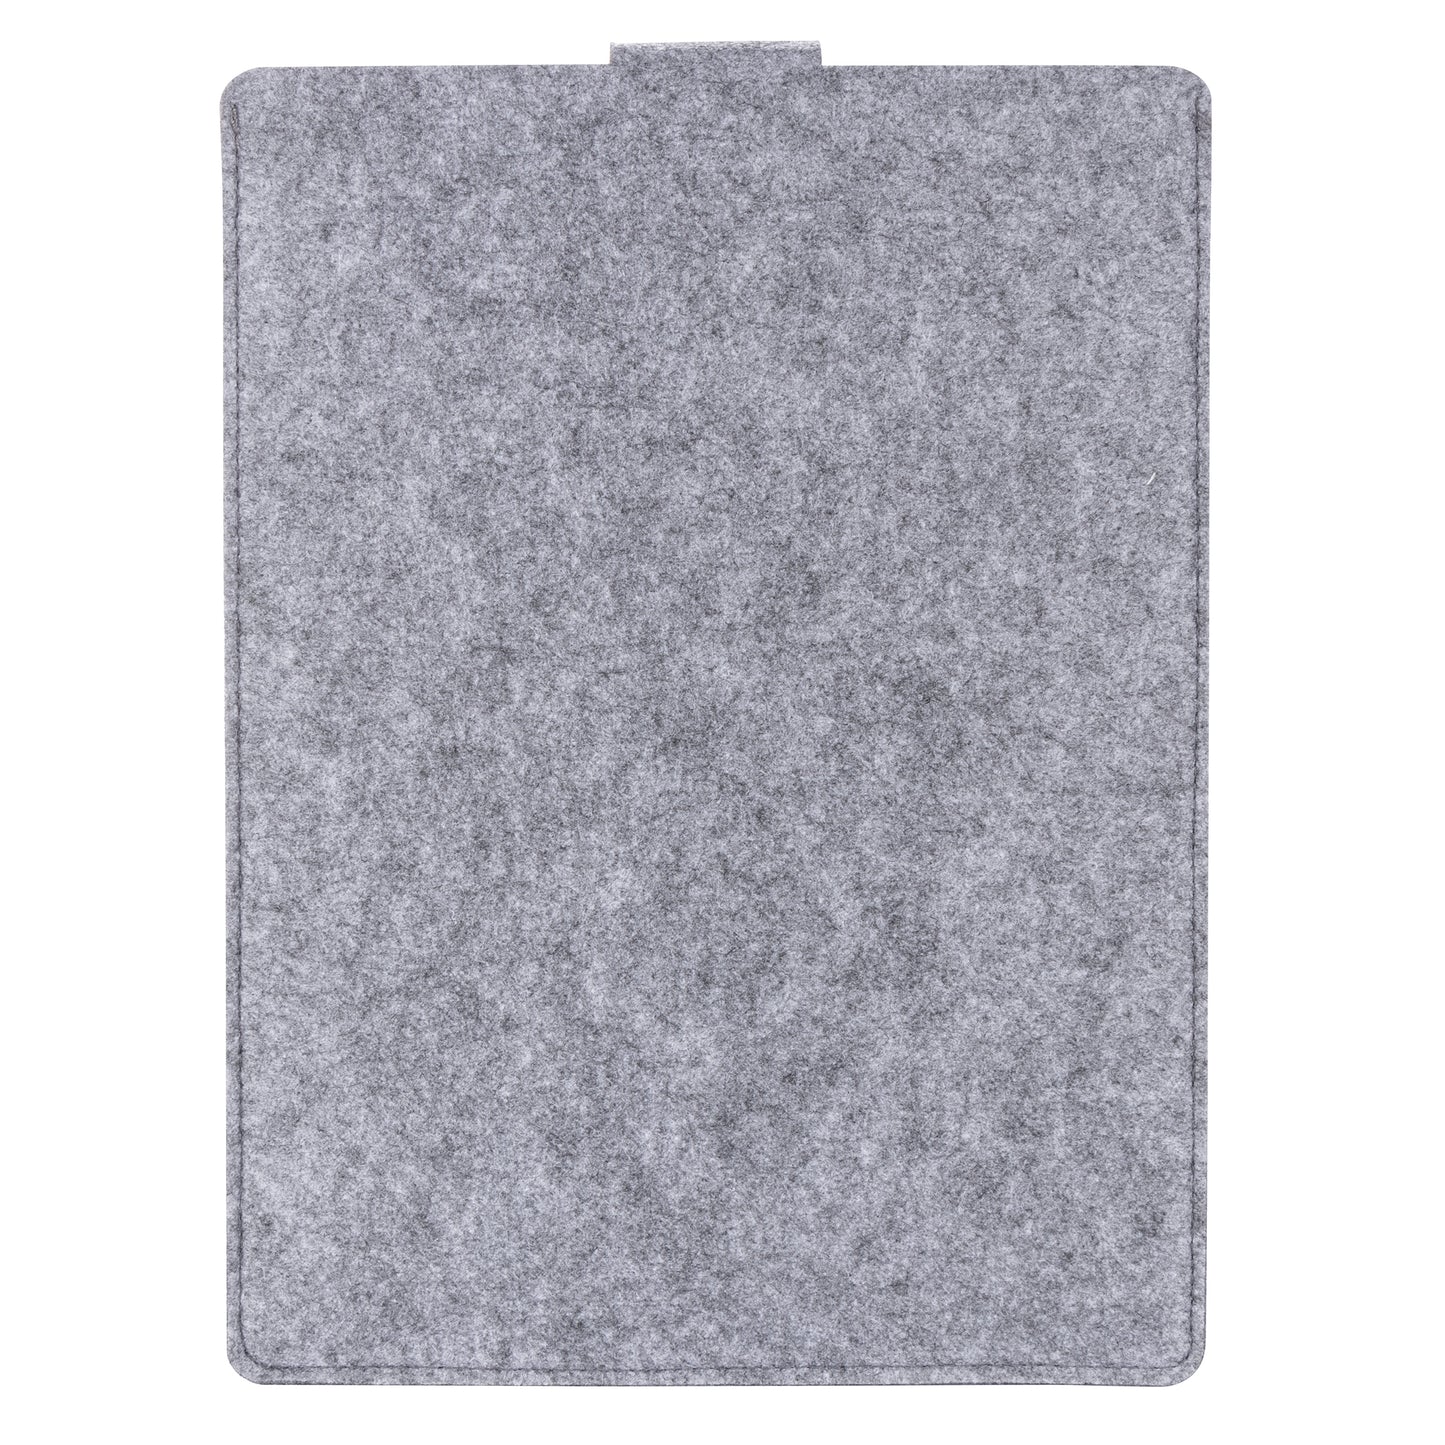 Light Gray Felt Laptop Sleeve Carrying Case by Sammy and Lou®